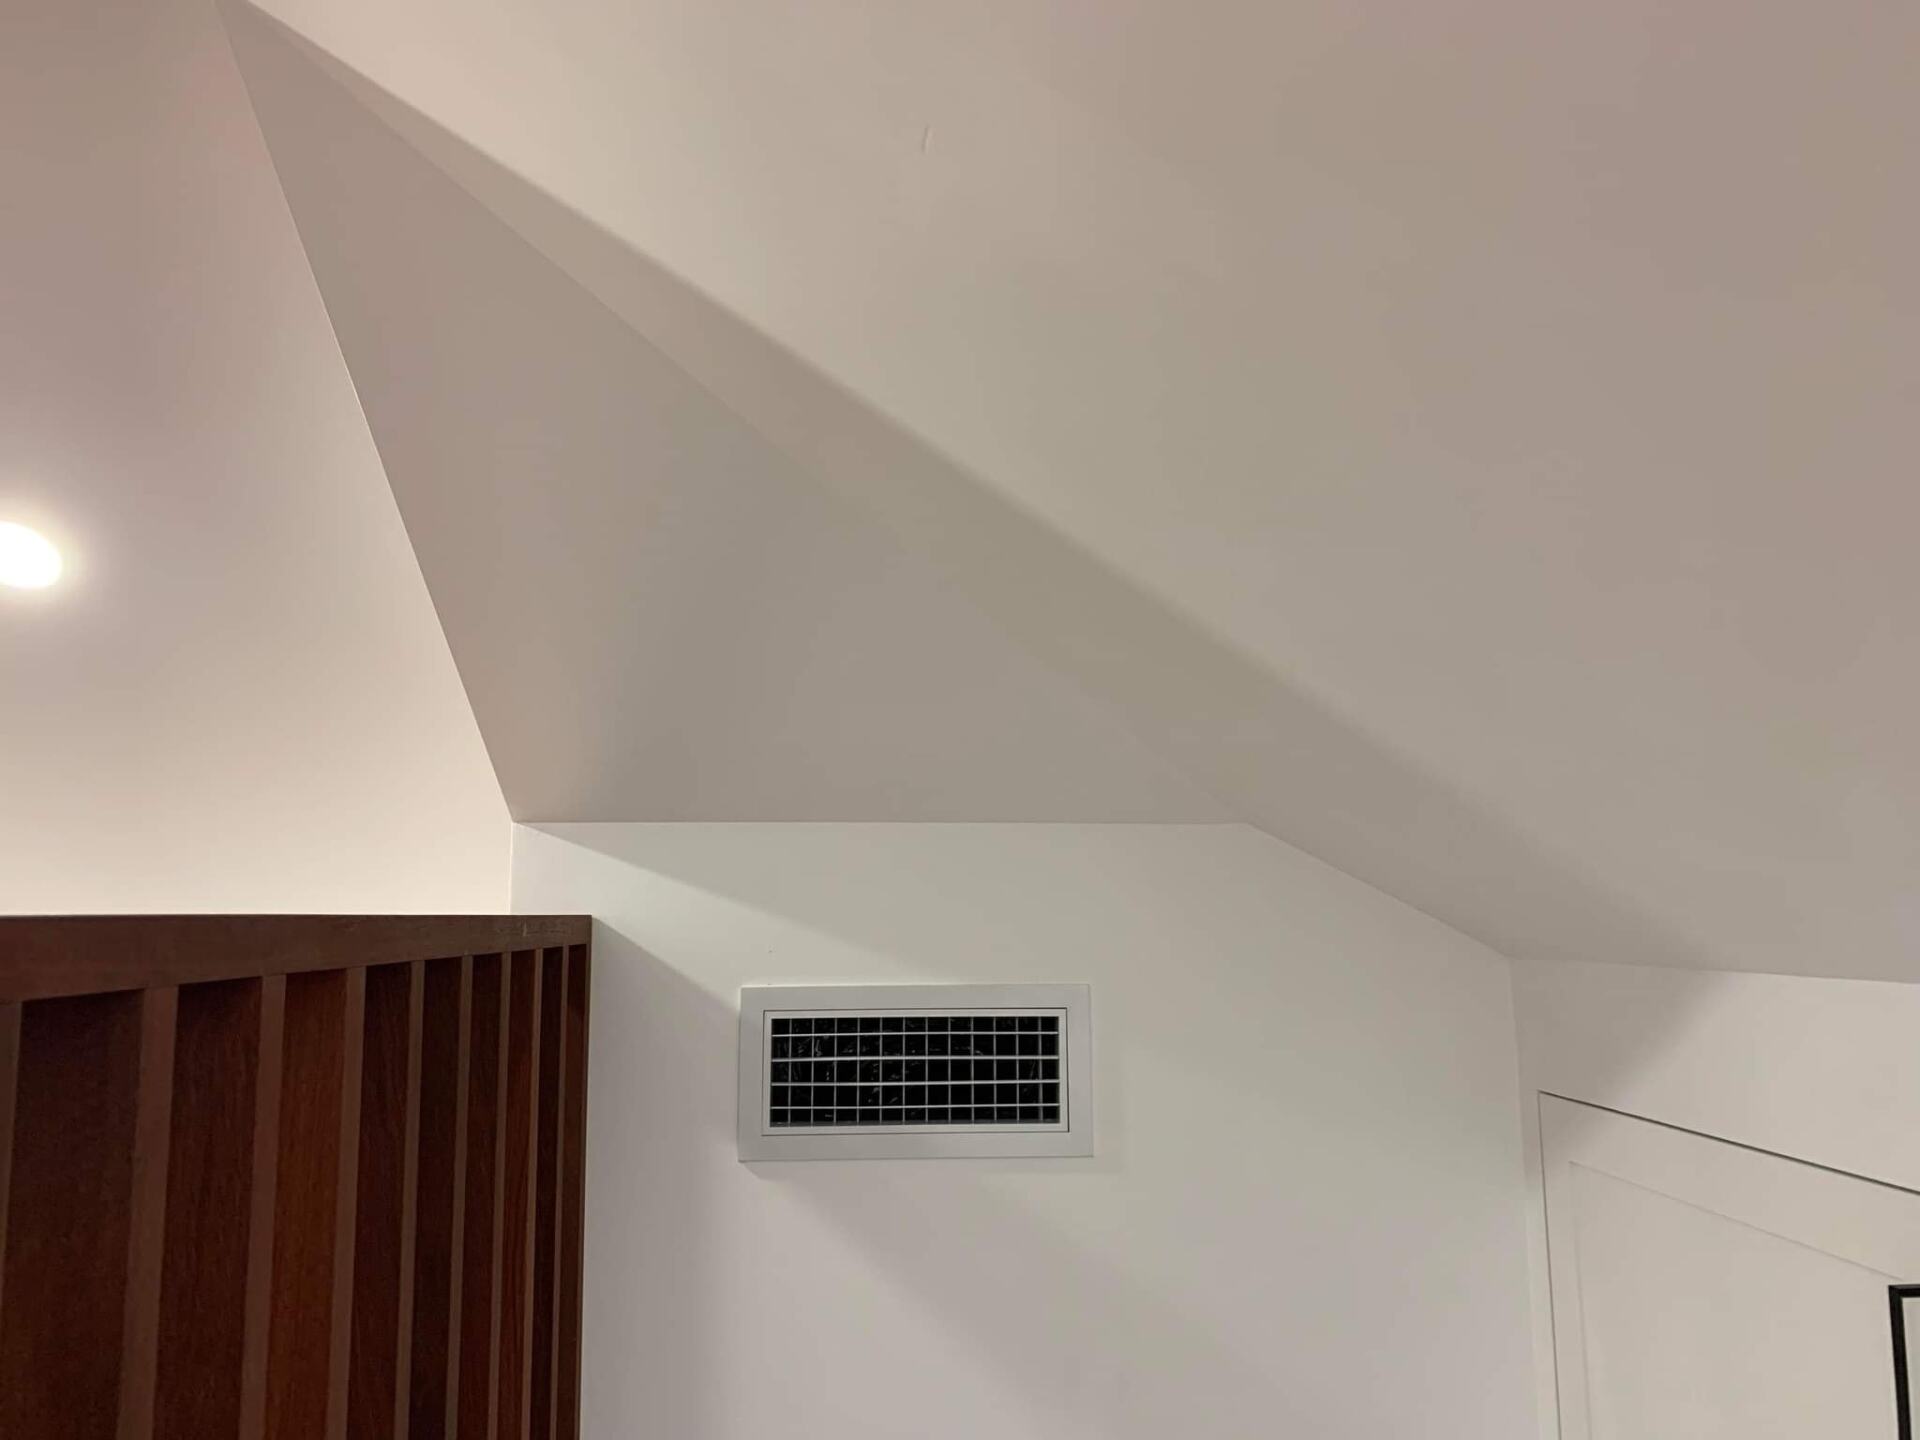 Panasonic Nanoe X Air Purification Ducted System — Ducted Heating in Illawarra, NSW